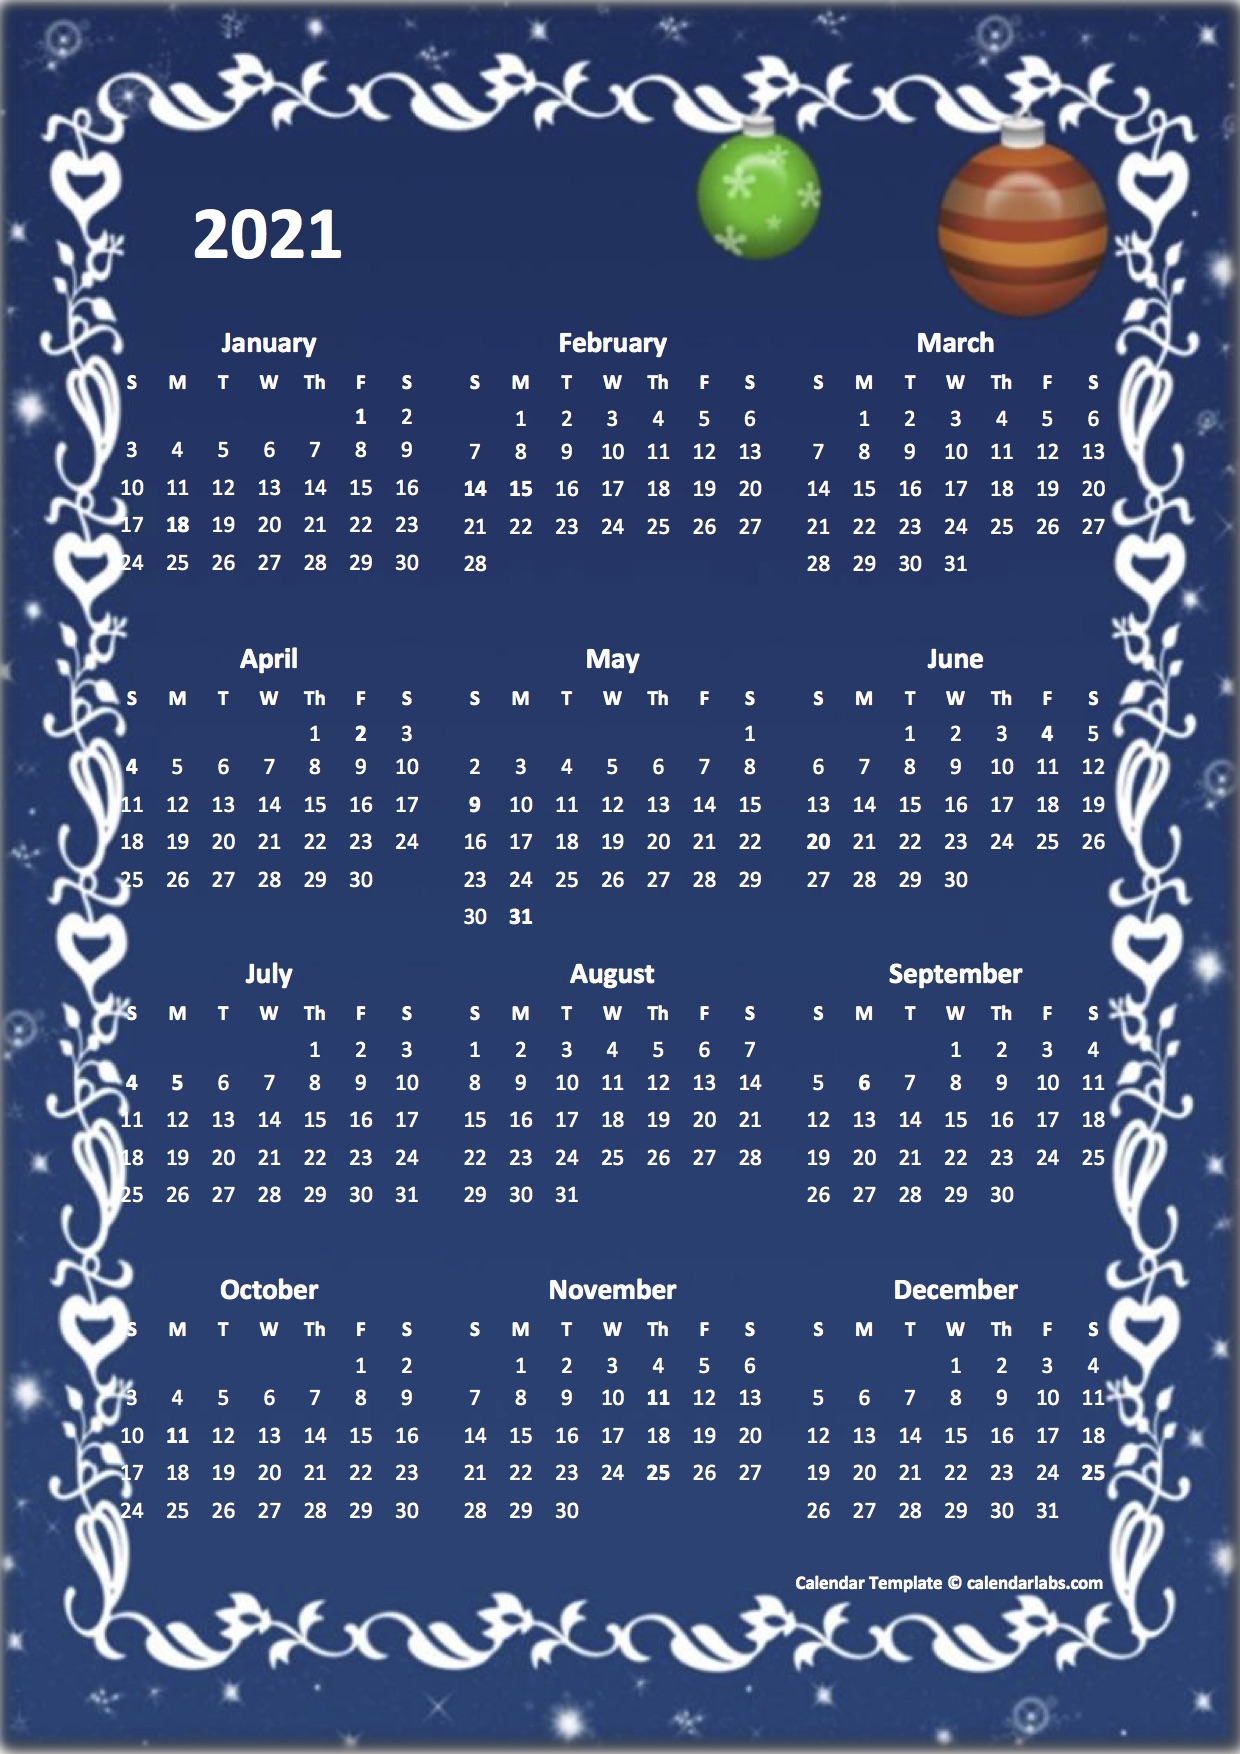 2021 Yearly Calendar Design Template Free Printable